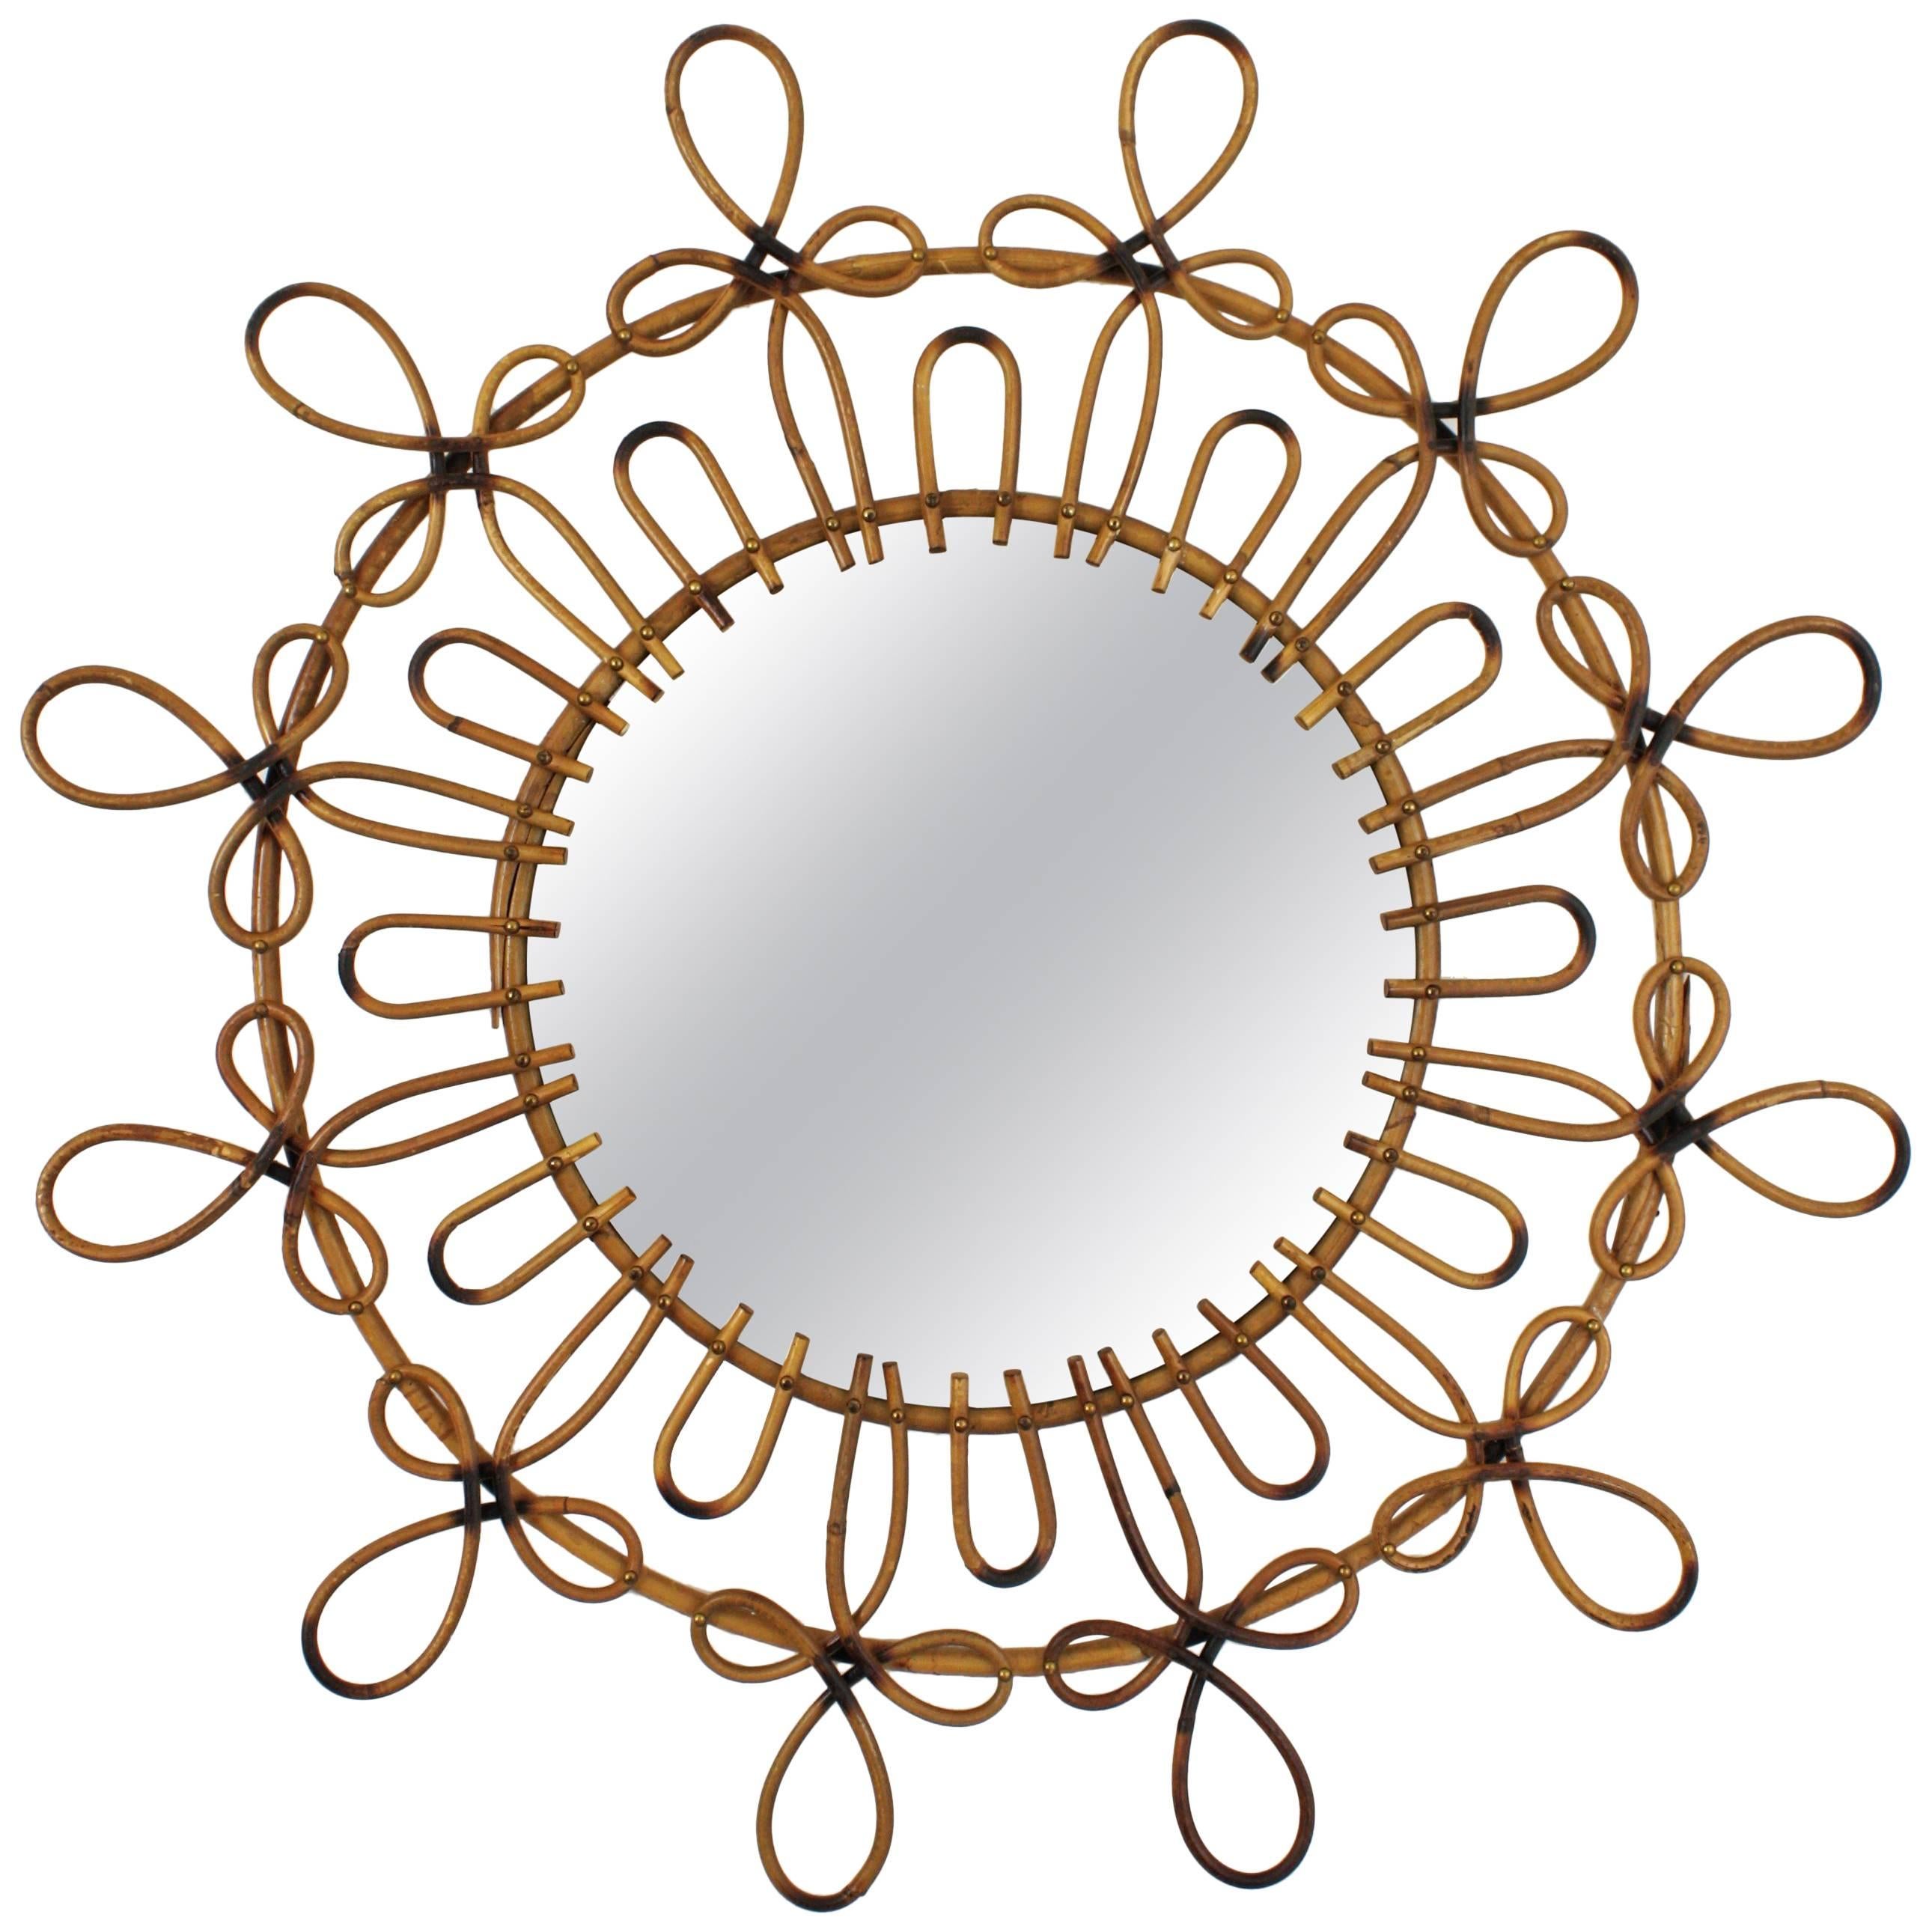 Sculptural Spanish handcrafted wicker or rattan mirror with two decorative layers of loops and pyrography details. Spain, 1960s.
Highly decorative to place it alone or creating a wall decoration with other mirrors in this manner. Excellent vintage